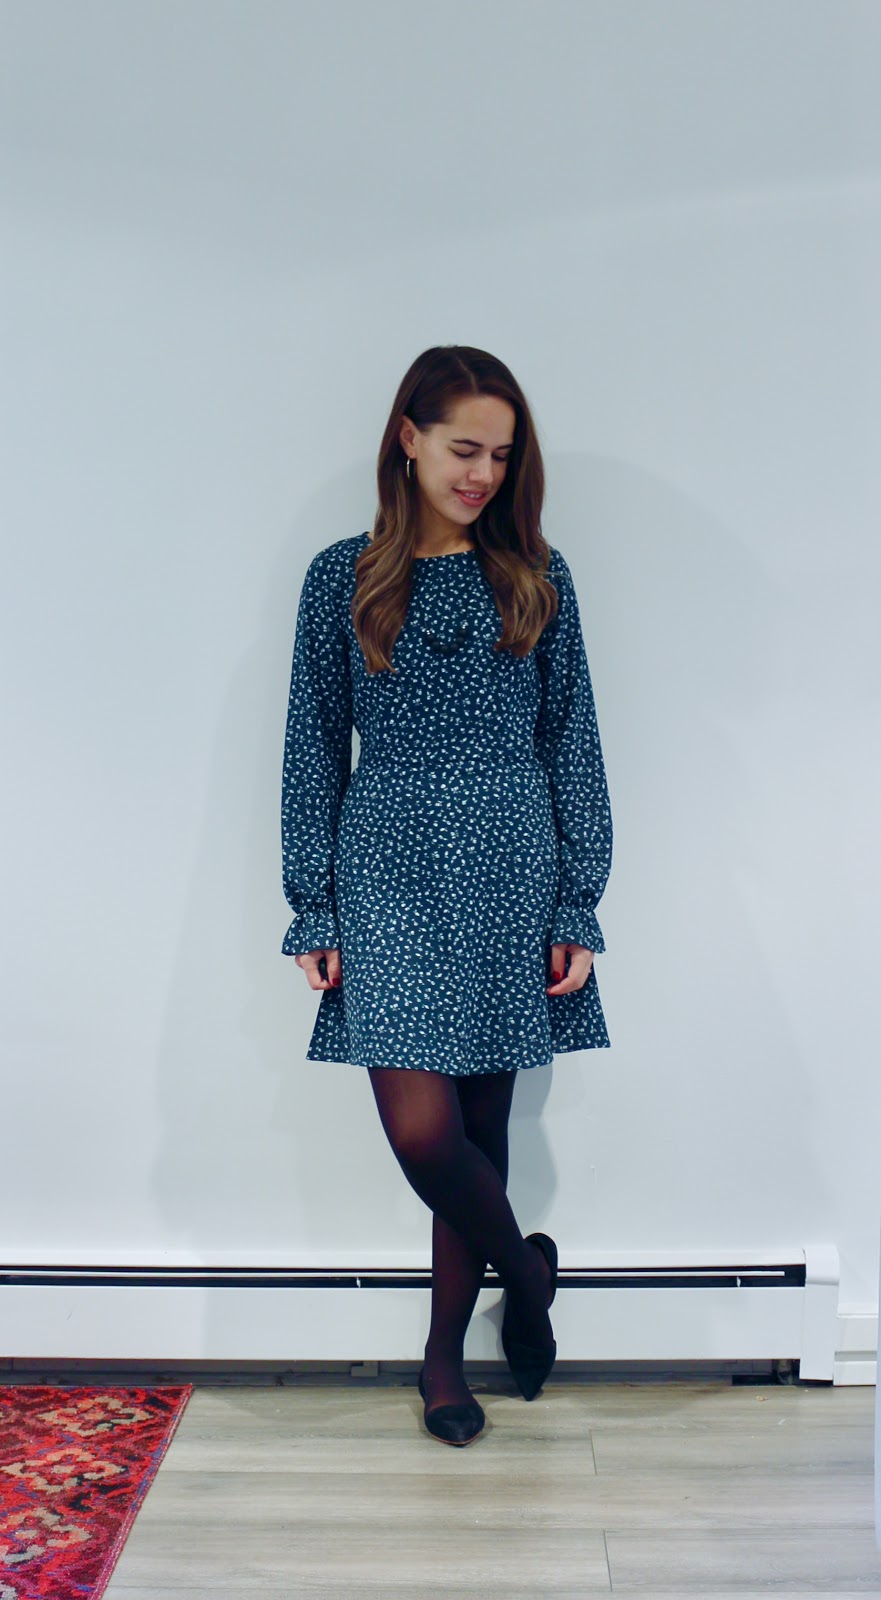 Jules in Flats - H&M Creped Dress (Business Casual Fall Workwear on a Budget) 